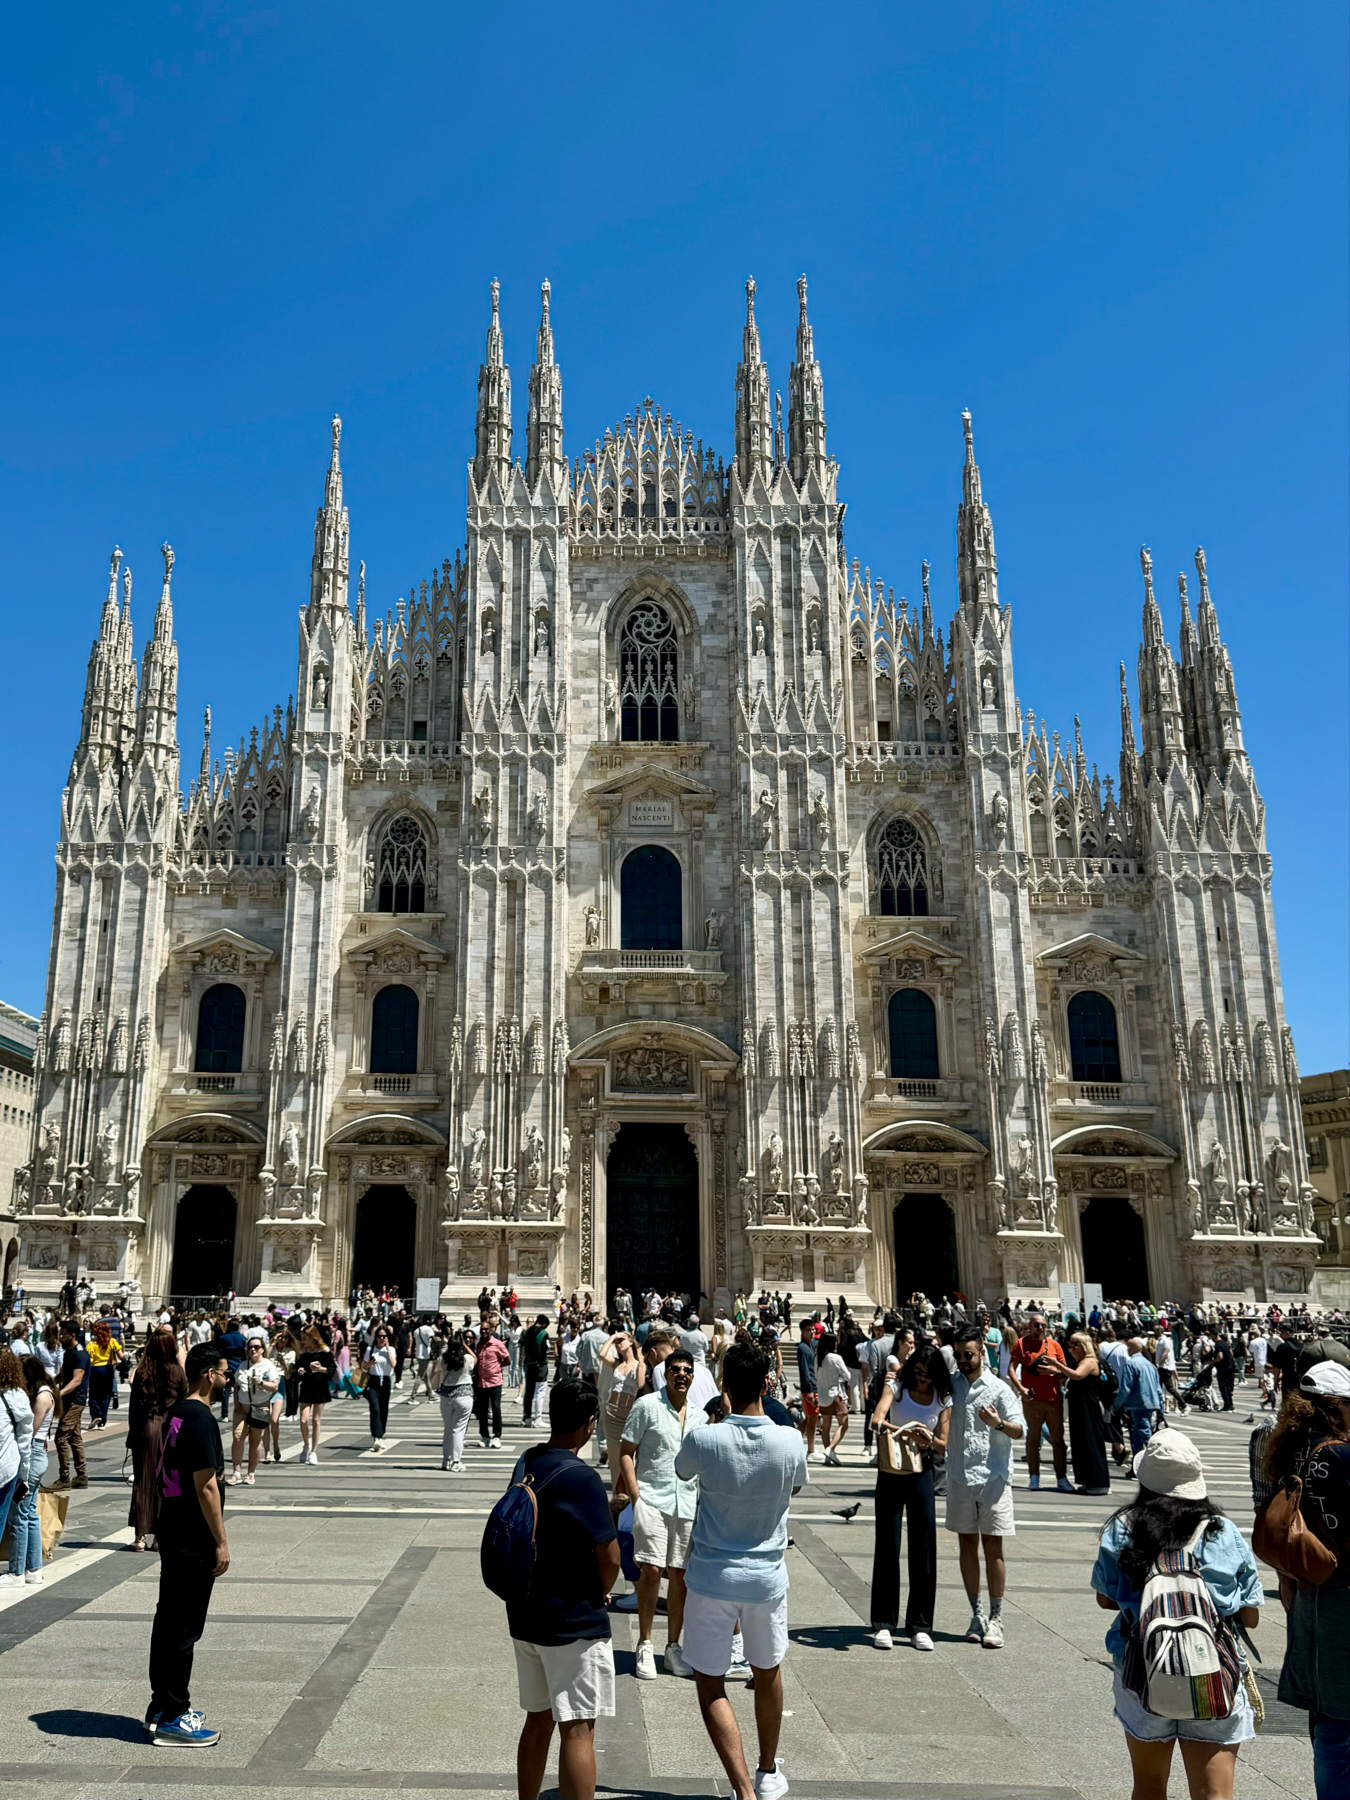 A large crowd of people stands in front of the Milan Cathedral (Duomo di Milano) on a sunny day. The Gothic architectural details of the cathedral are prominent against a clear blue sky. Tourists are visible taking photos and appreciating the historic structure.